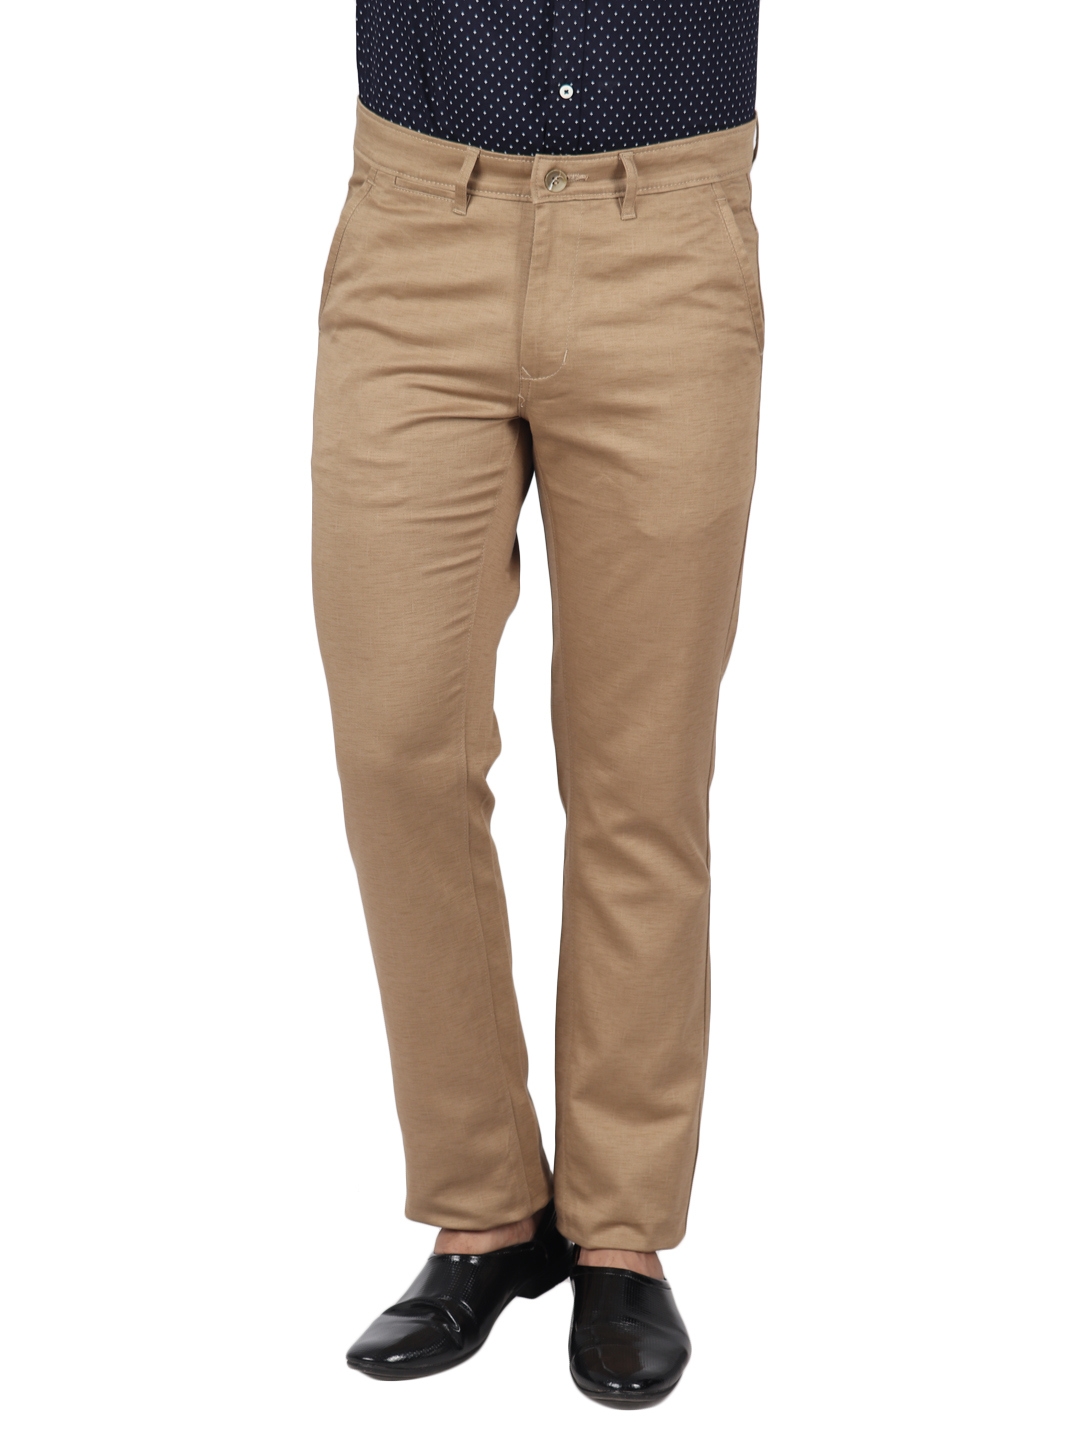 Brown 36 & 38 Peter England Trousers at Rs 1080 in Vapi | ID: 18845993630